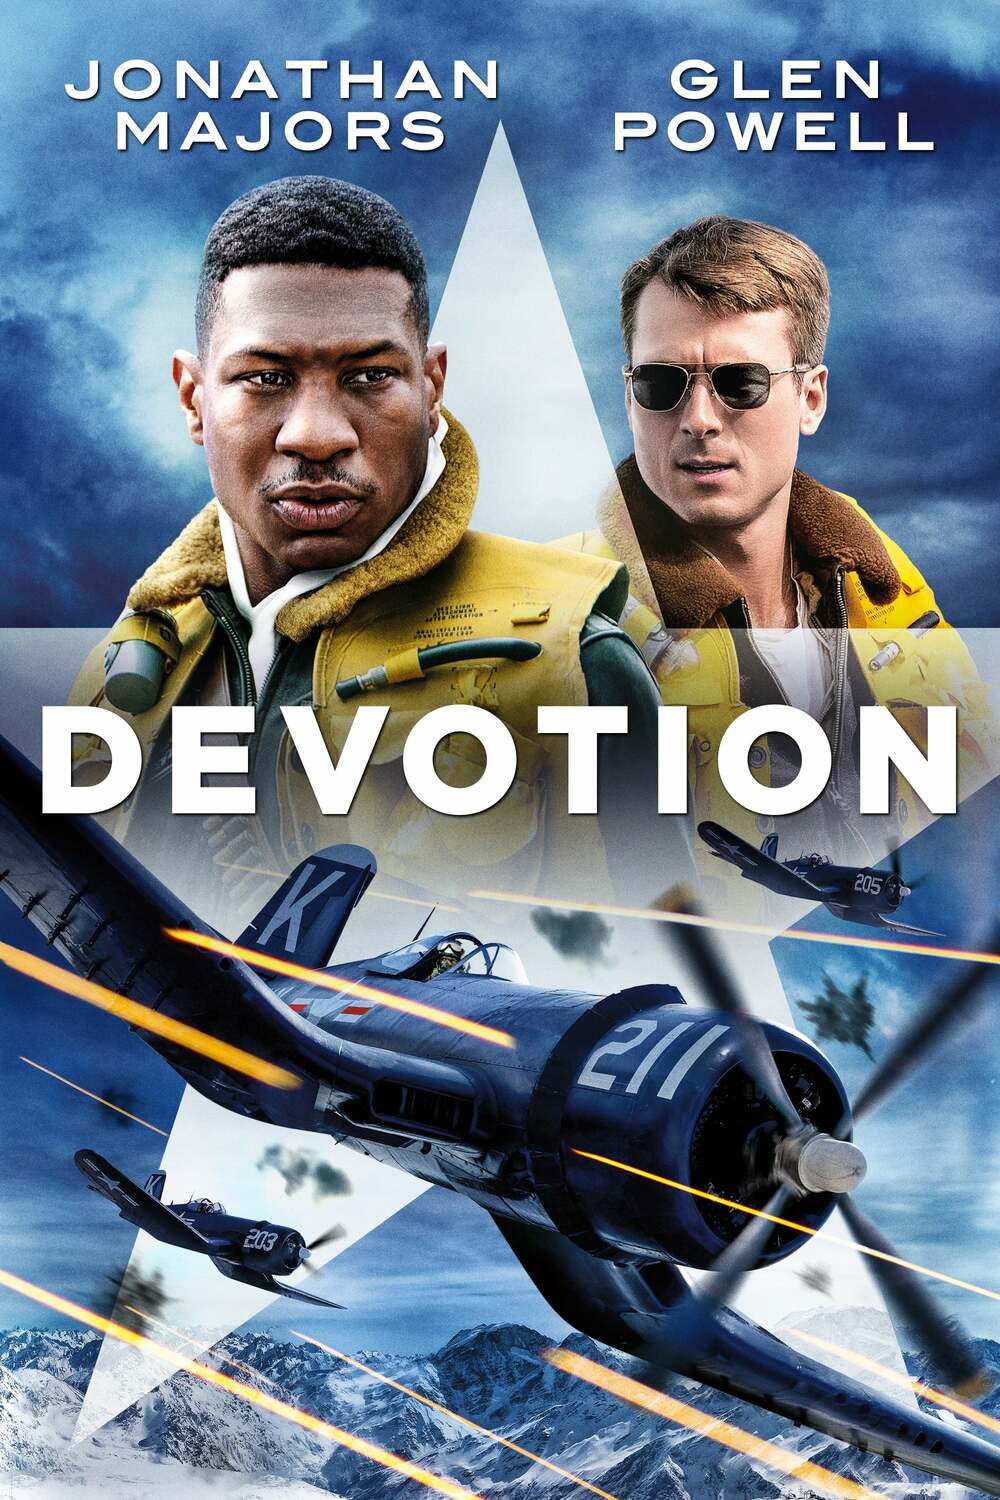 devotion movie review nytimes